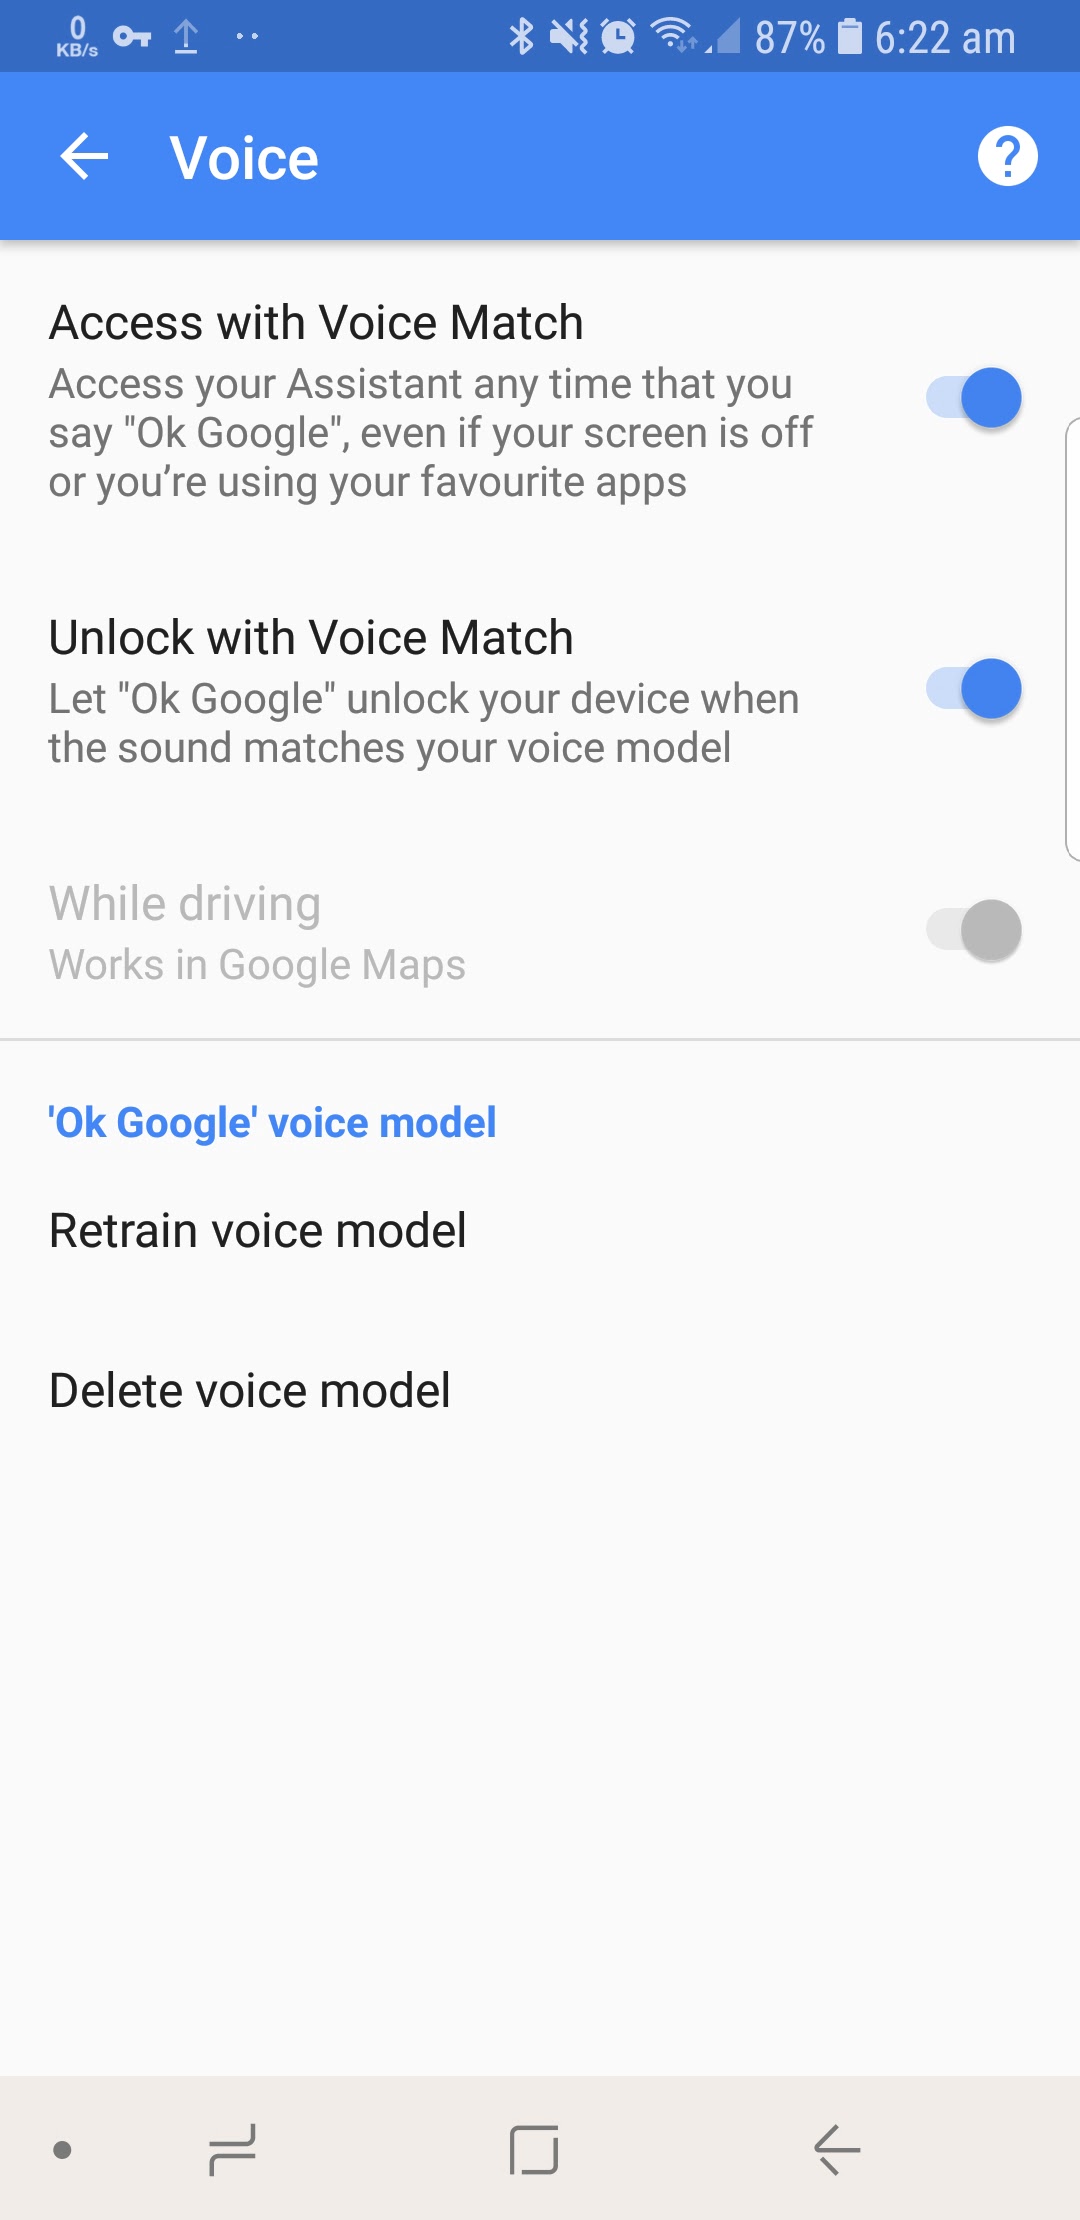 Dsiable Voice Unlock Feature if you use Google Assistant